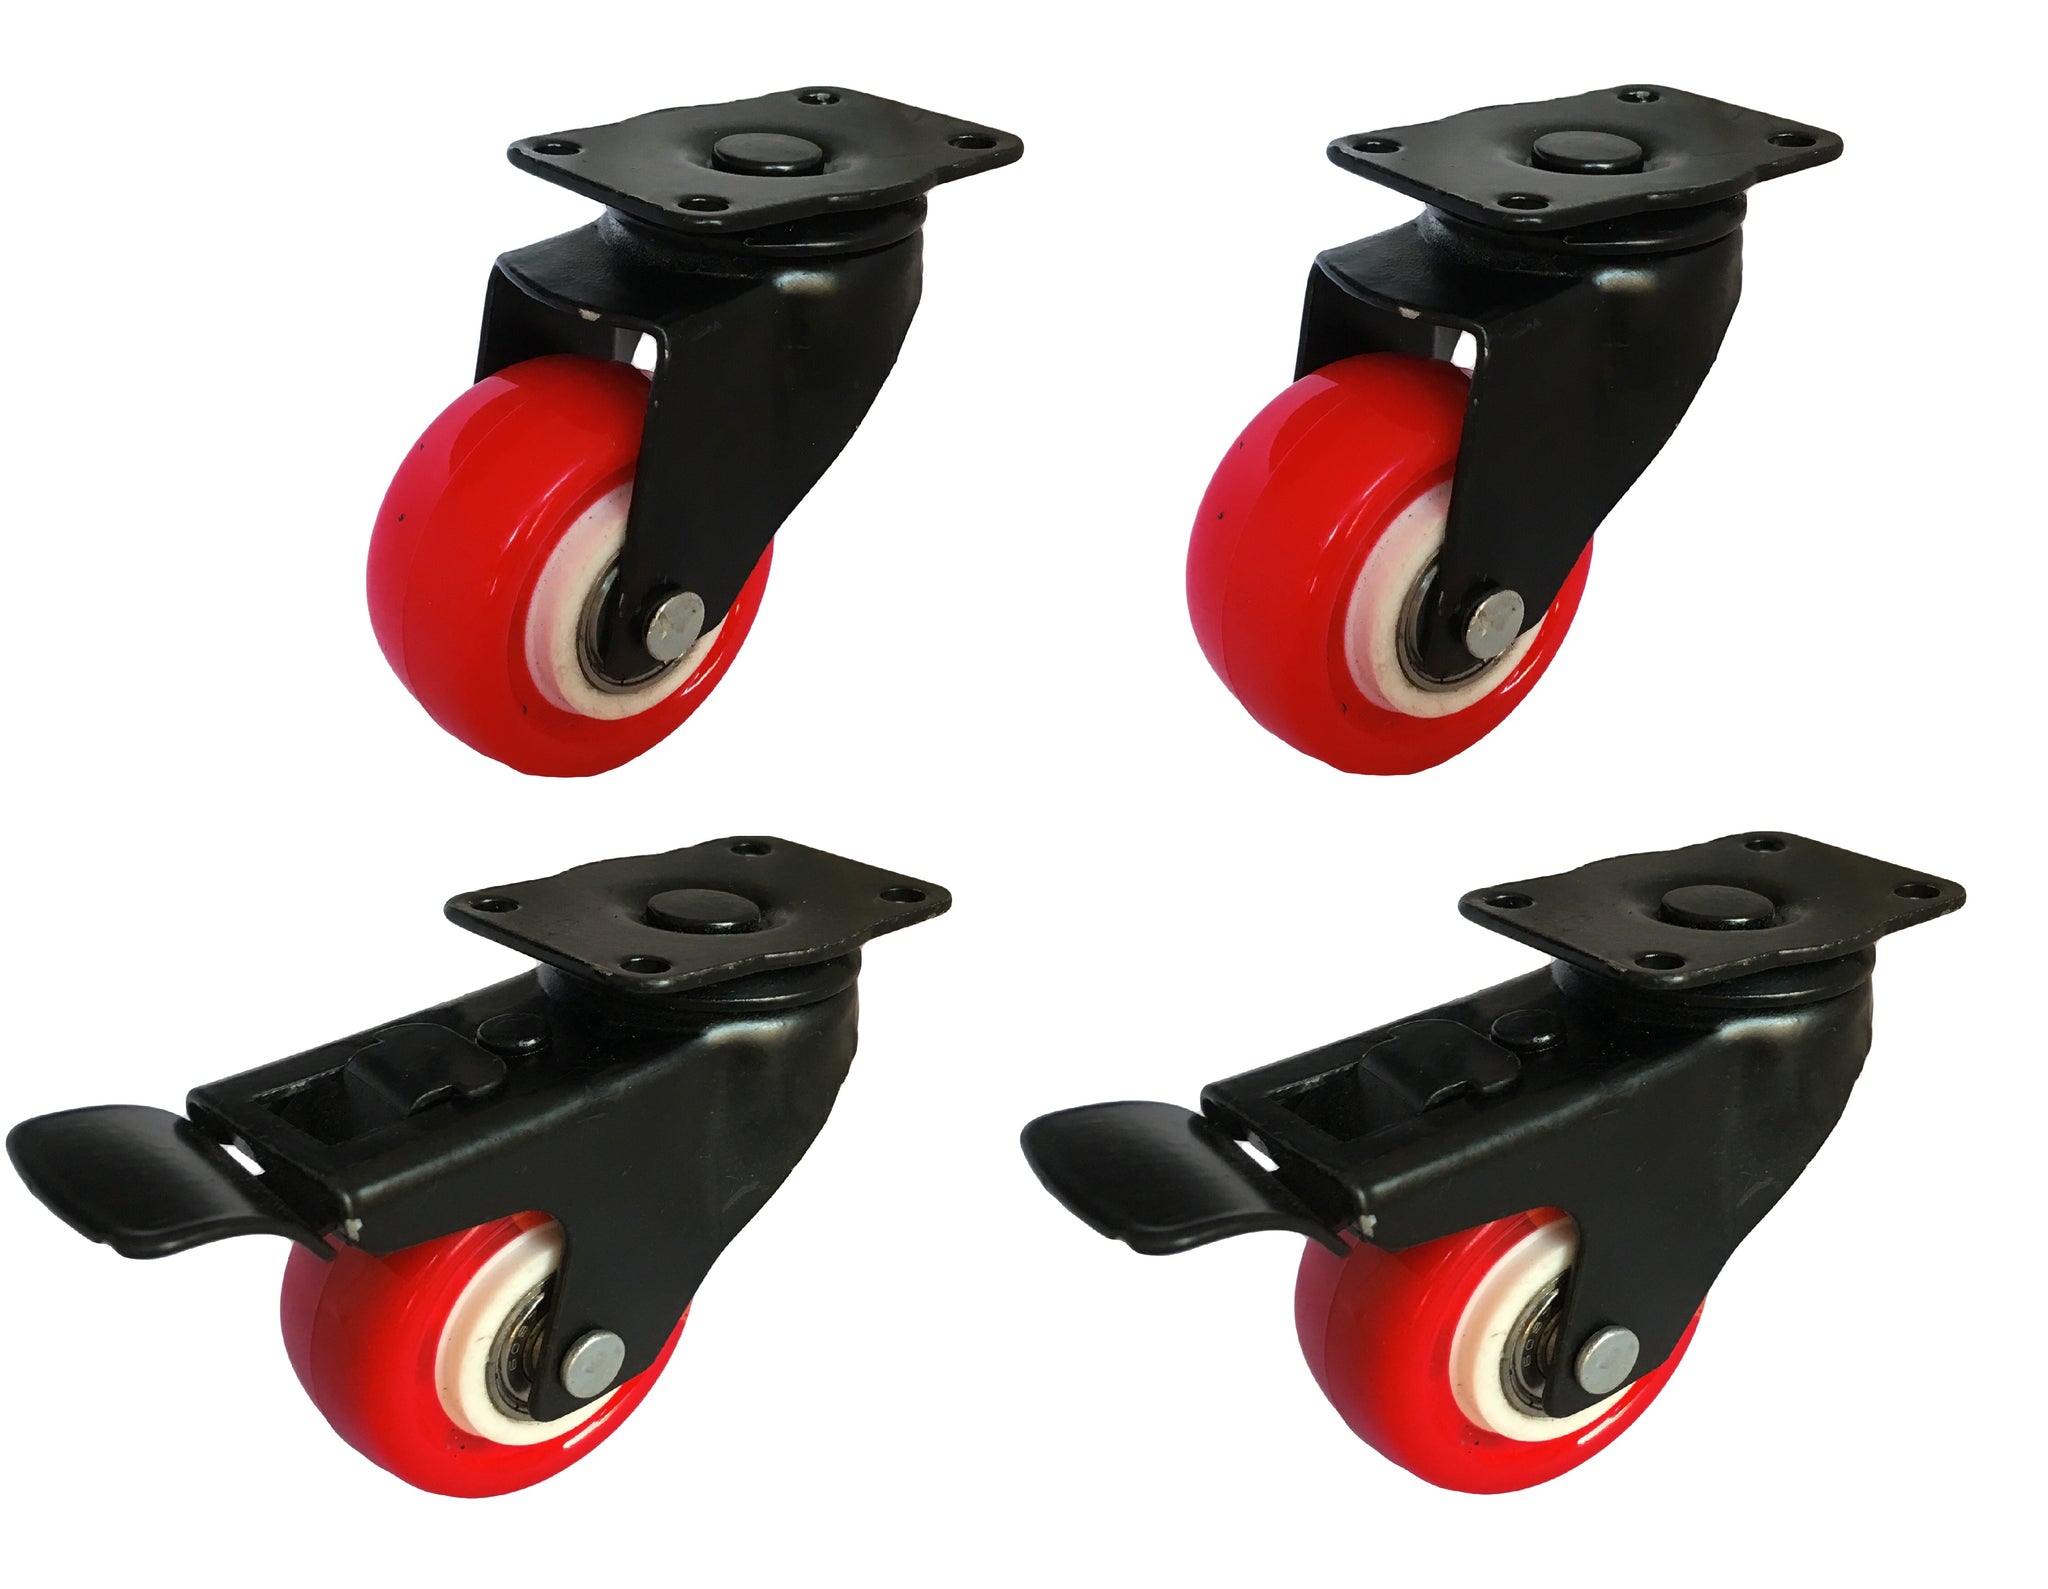 4 Pack 2" Heavy Duty Caster Wheels Soft Rubber Swivel Caster with 360 Degree Plate Fittings / 2 with Brakes & 2 Without (Red)/IMP-U72-73